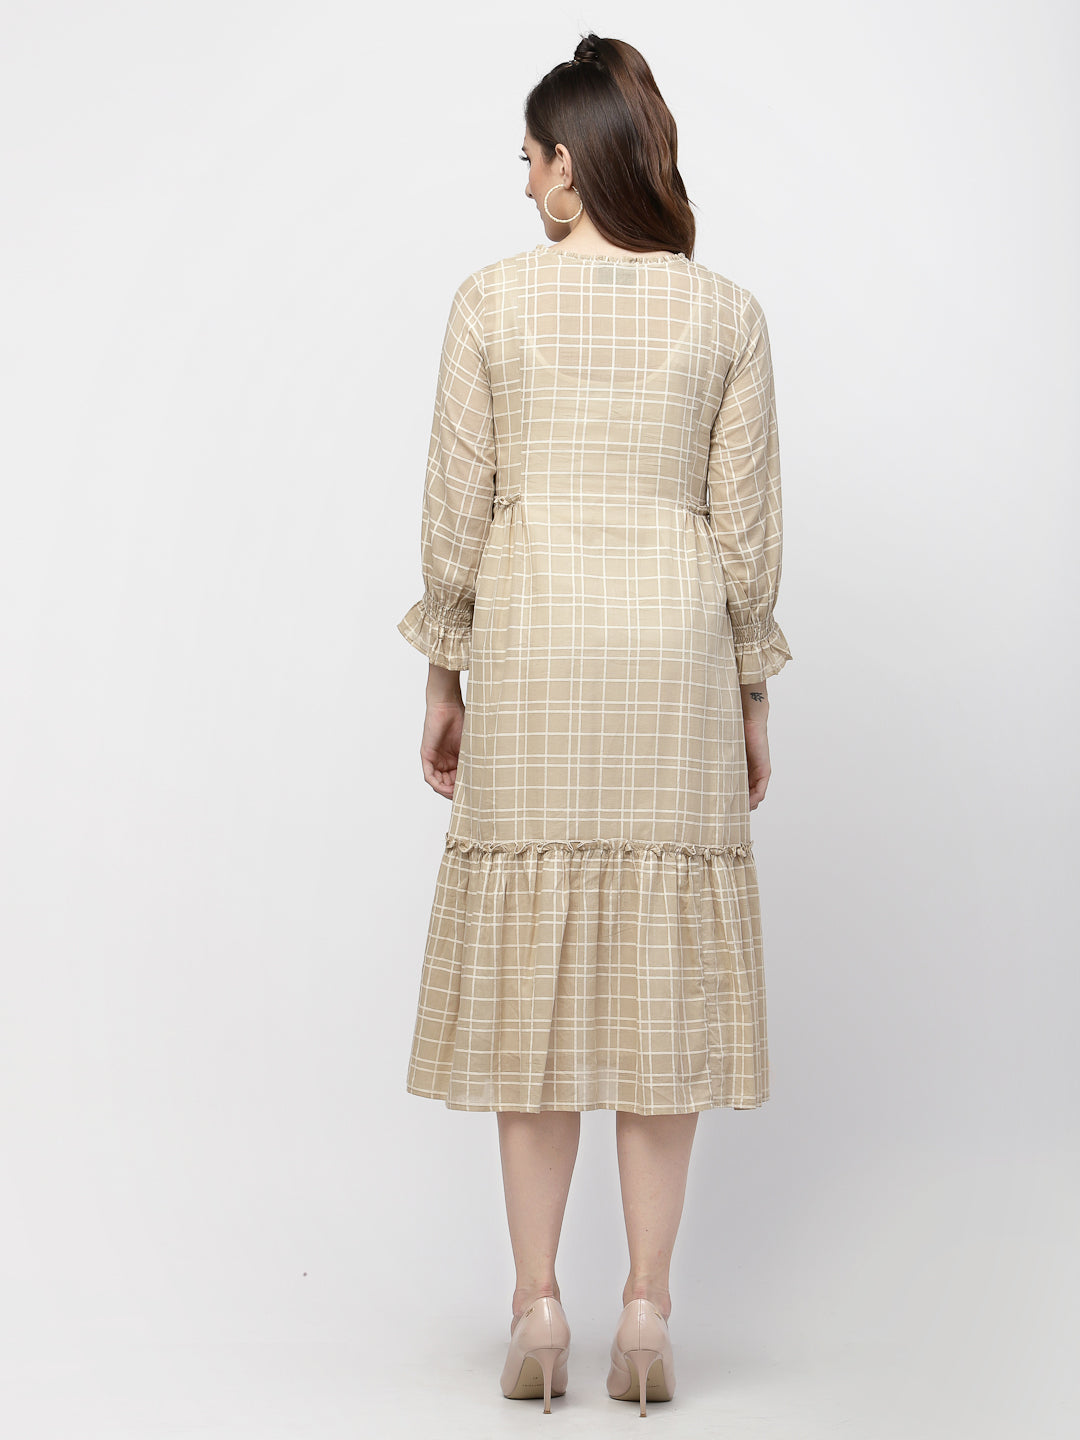 Terquois Self Design Beige Checkered Casual Dress with Ruffle Tie-up Neck Dresses TERQUOIS   